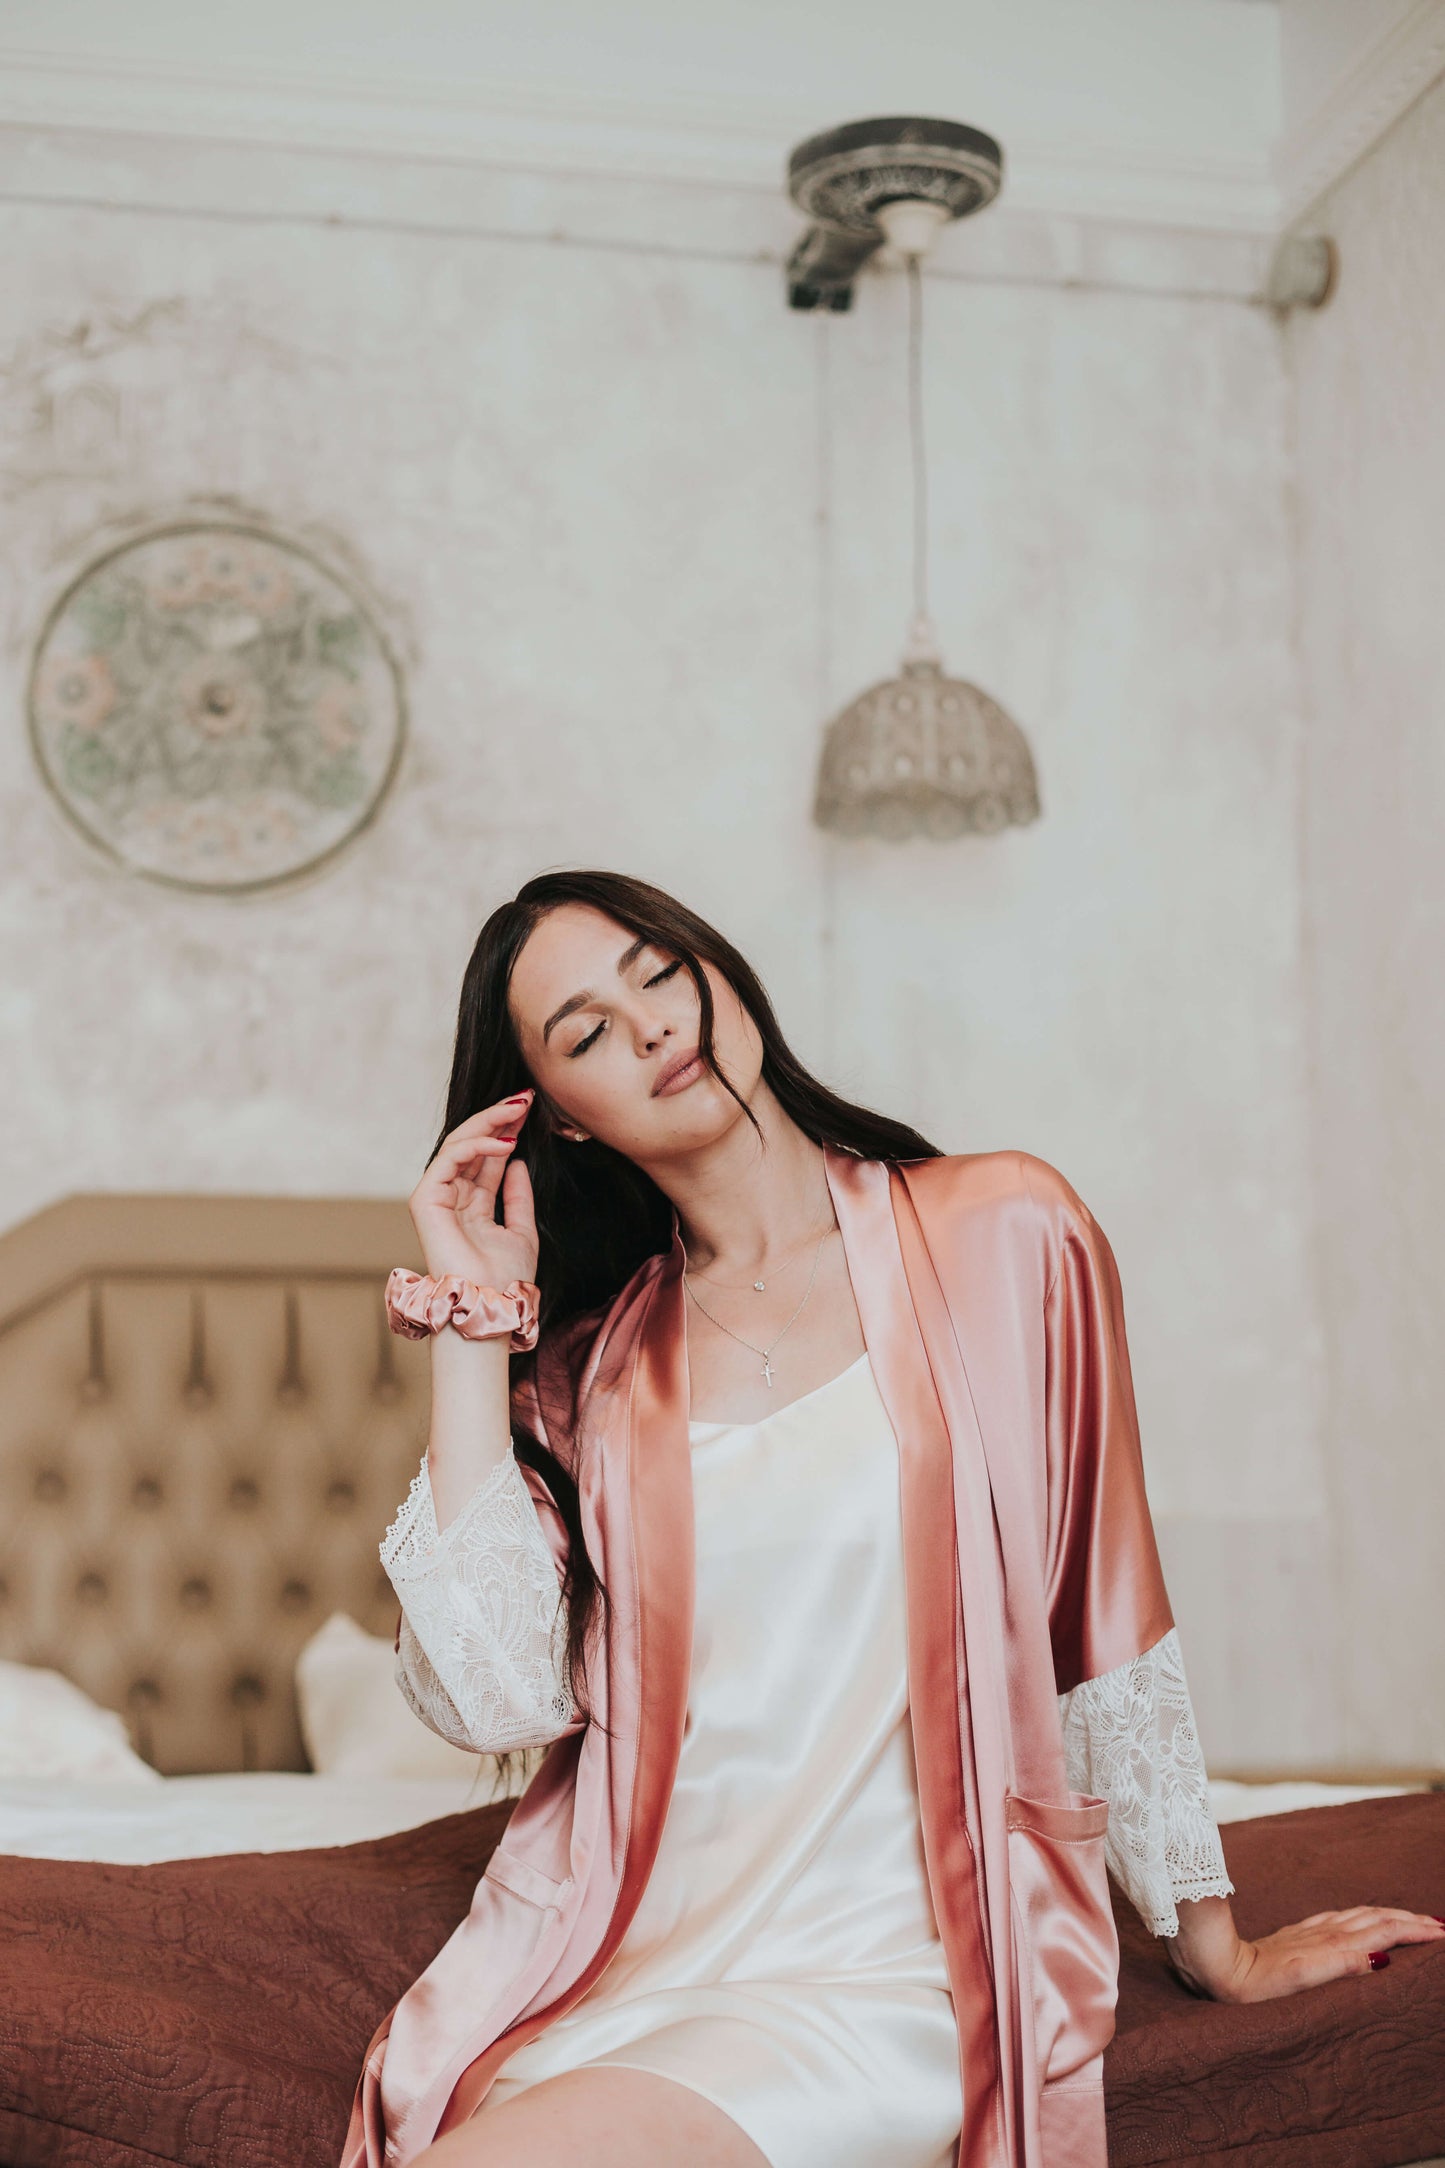 Silk robe with lace, Rose pink